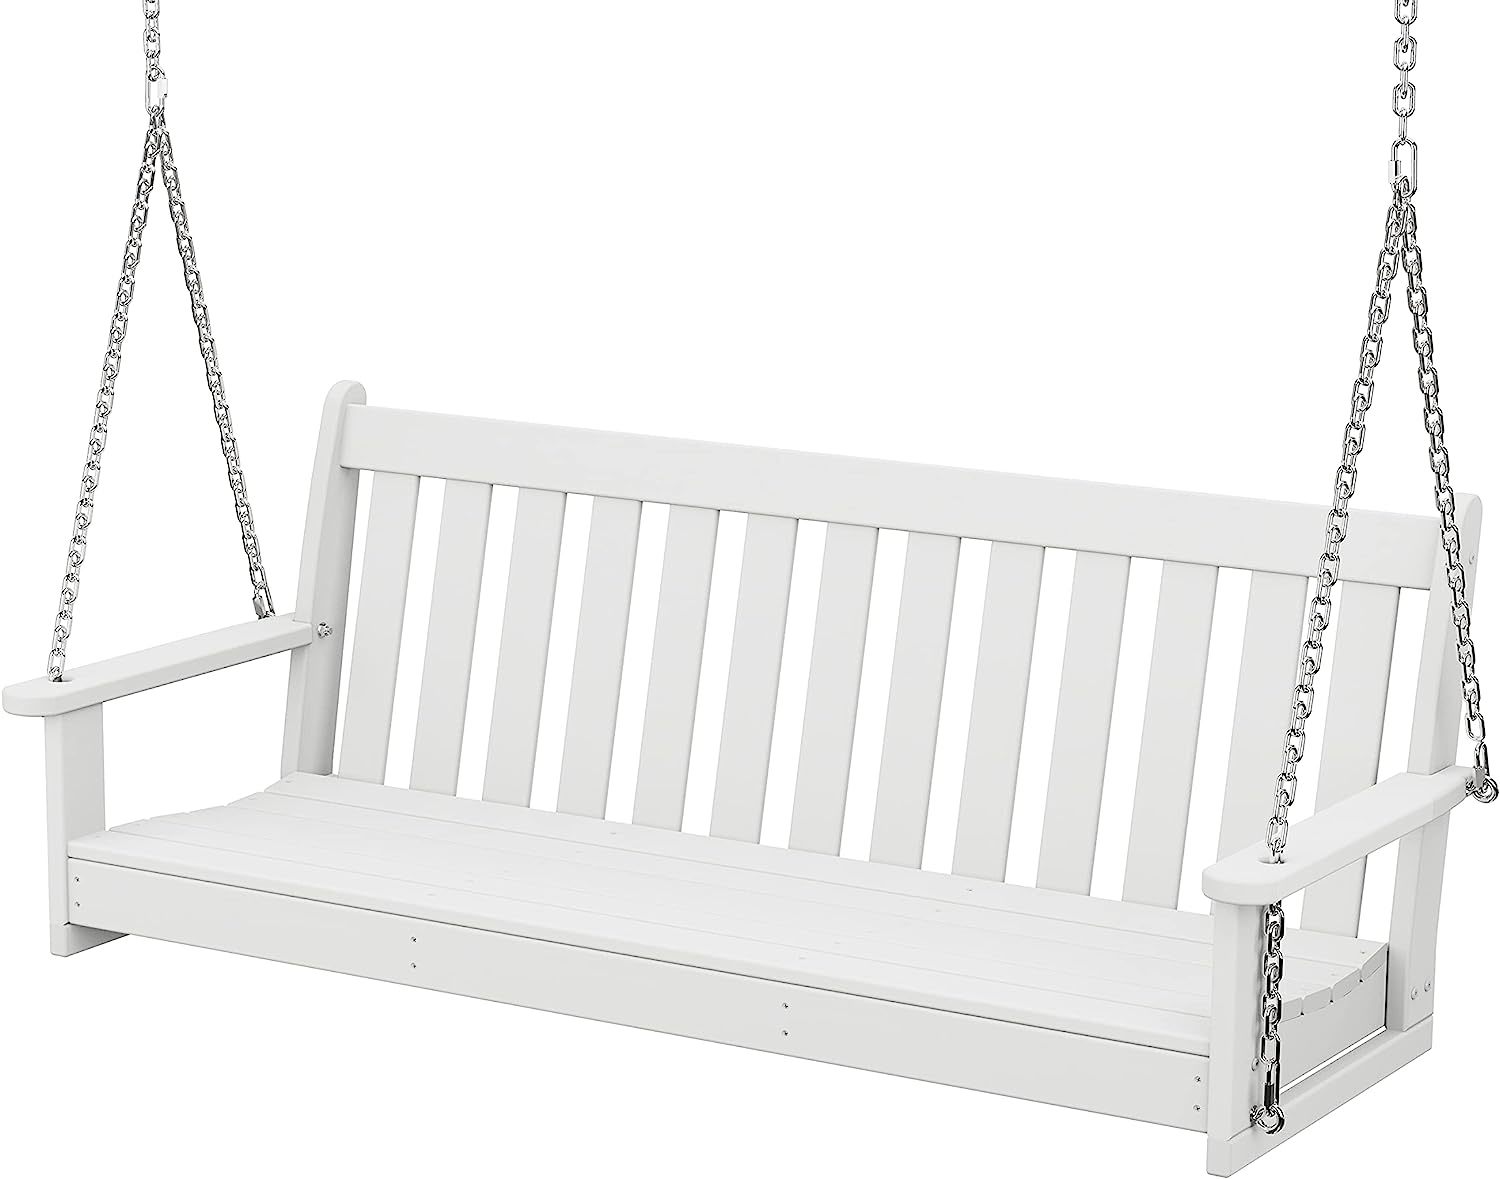 Polywood Gns60Wh Vineyard 60" Swing, White. - $583.95